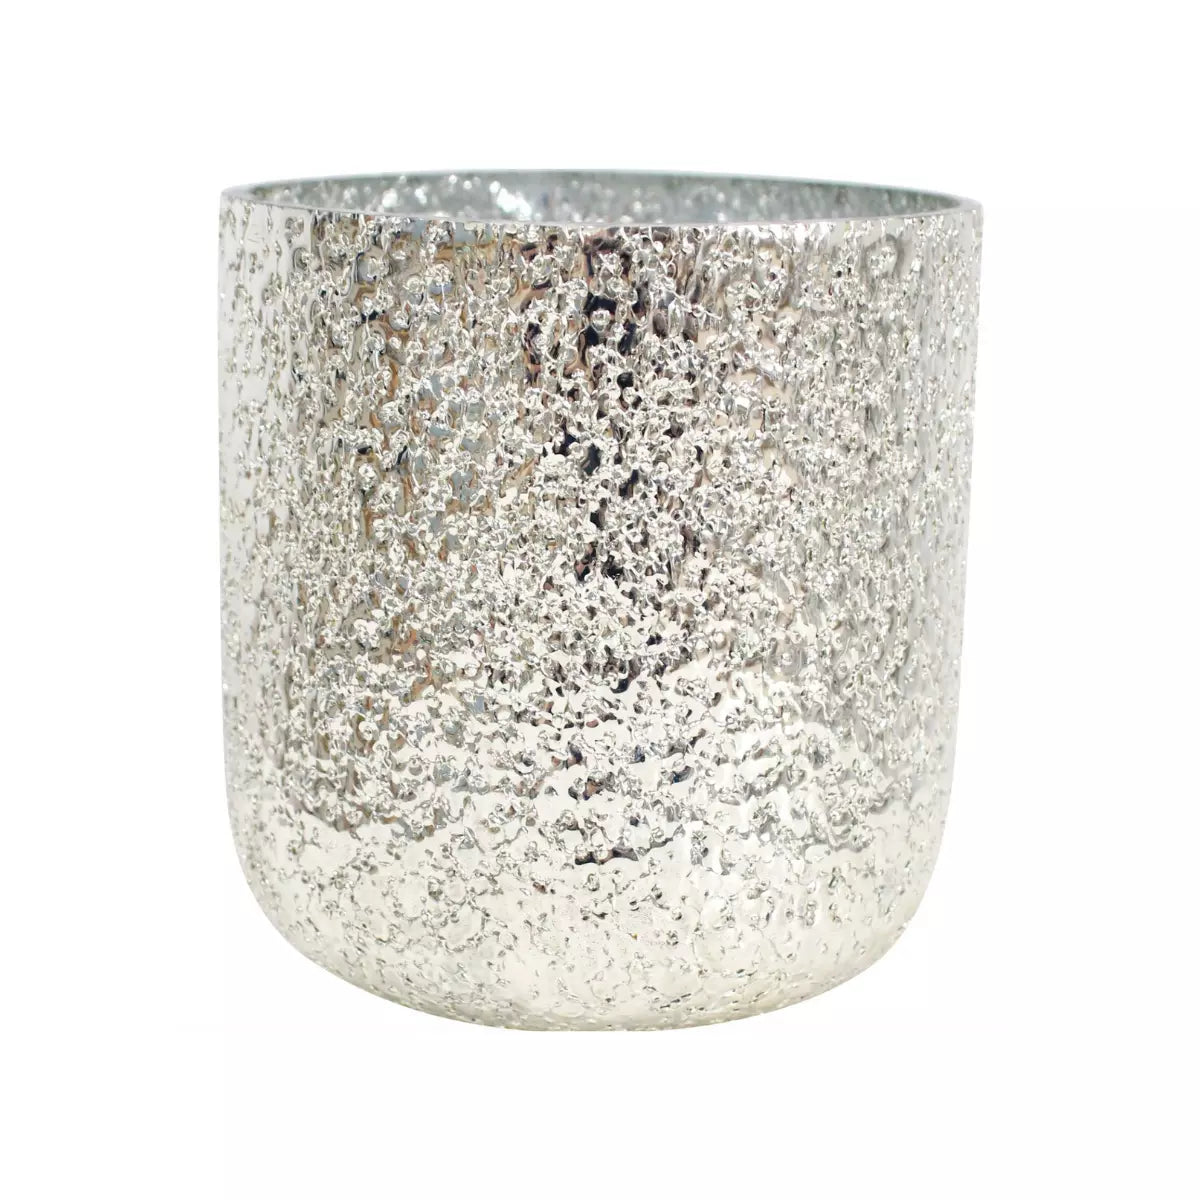 A Candle Holder - Gold Shimmer by LaVida glistening on a white background.